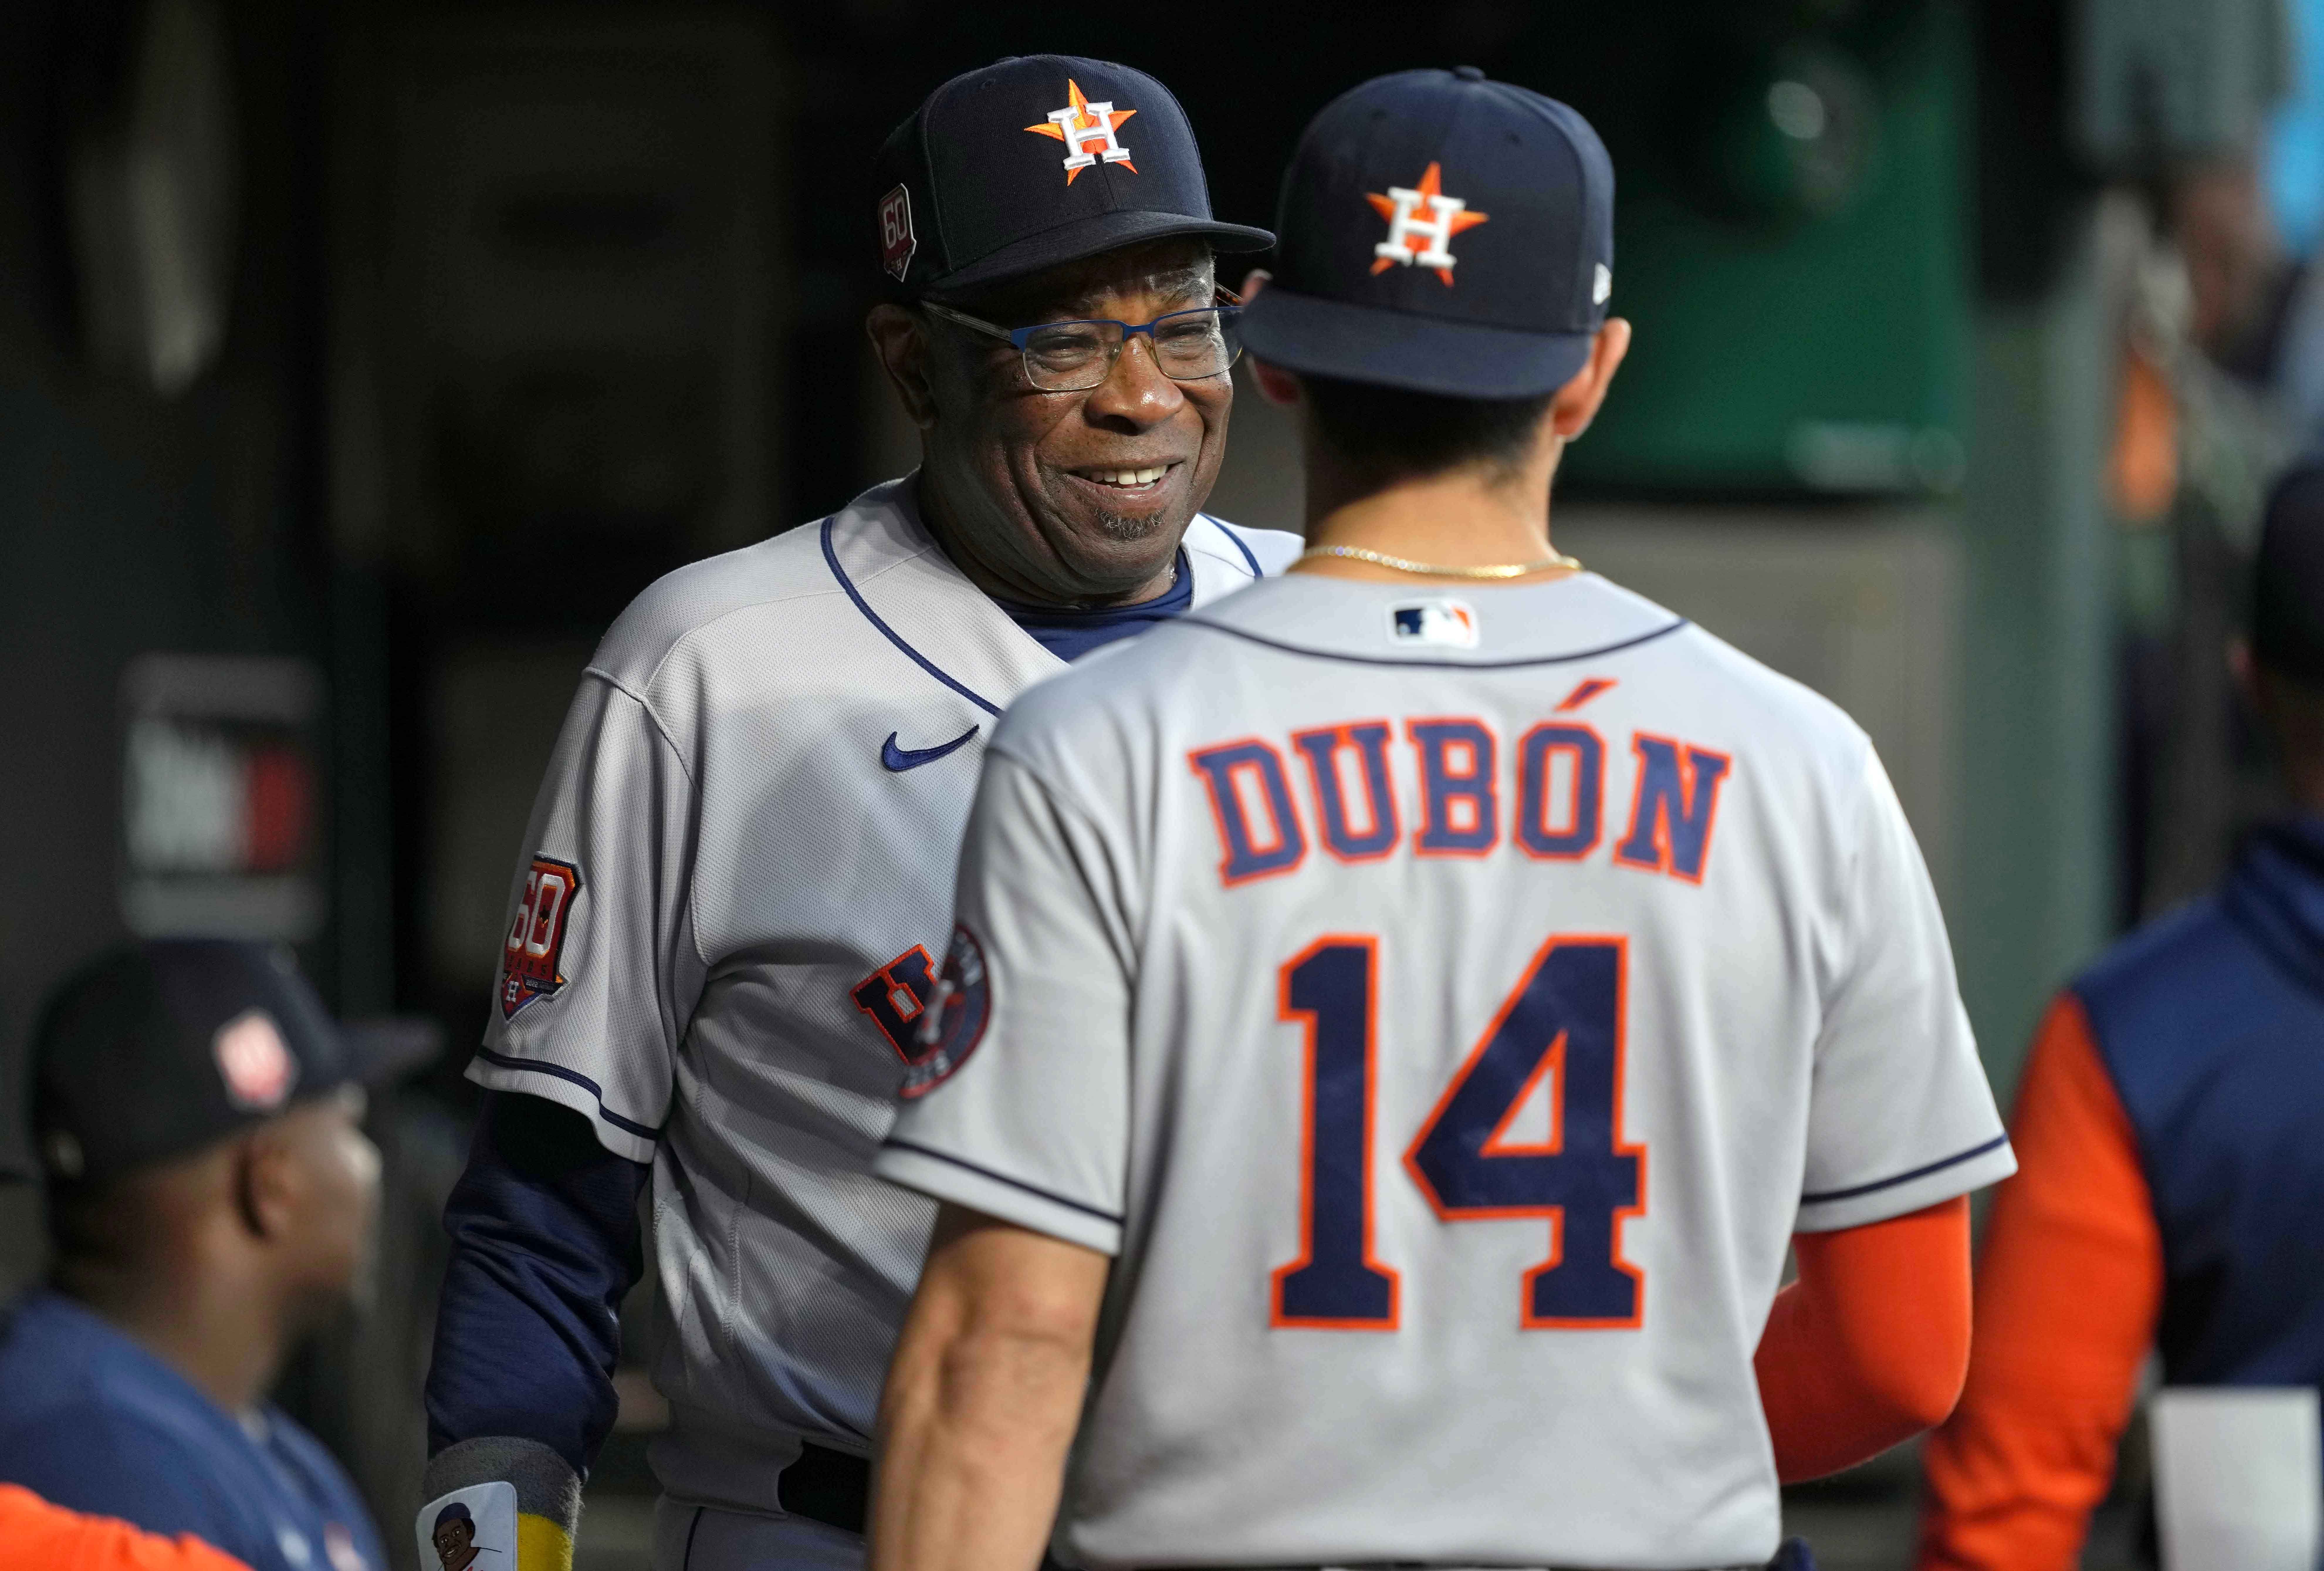 Former SF Giants Dusty Baker and Mauricio Dubón win World Series - Sports  Illustrated San Francisco Giants News, Analysis and More